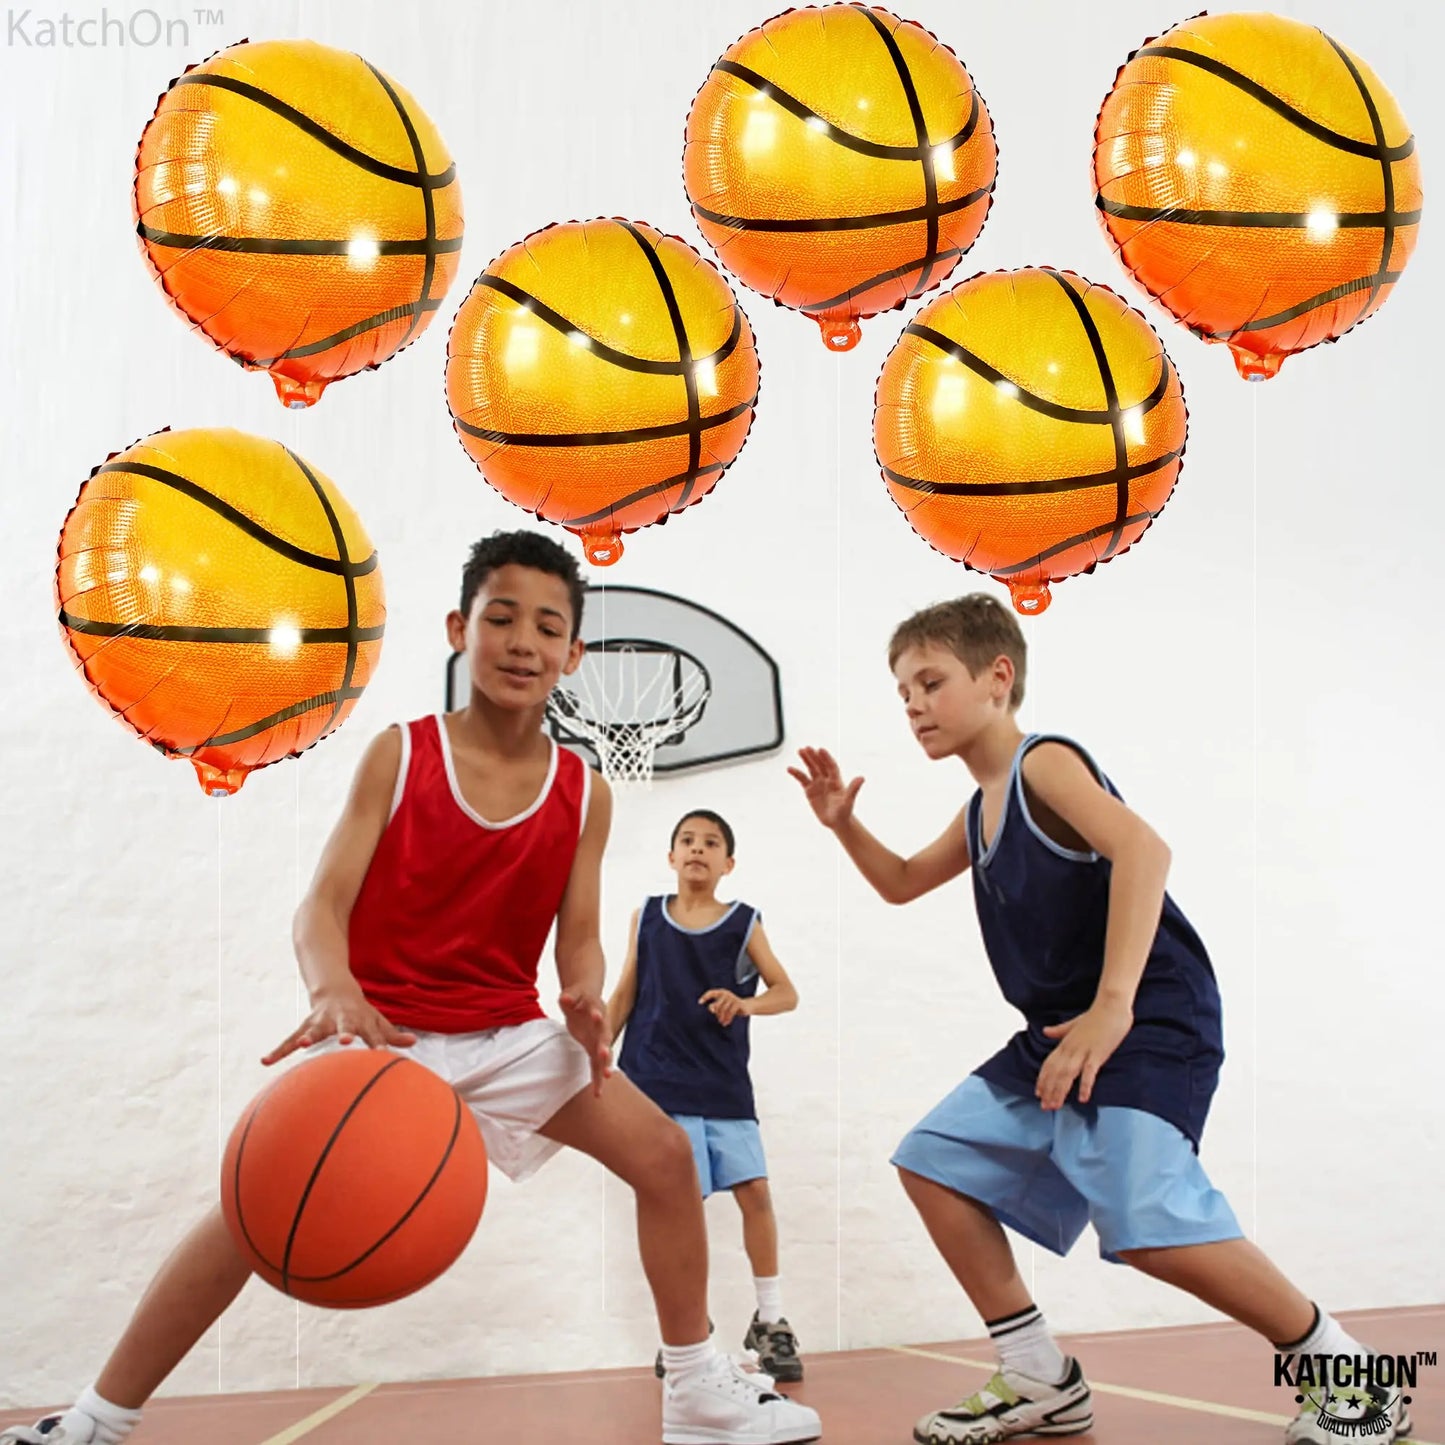 6 Pieces Basketball Balloons 18 Inch Ball Foil Balloons For Basketball Birthday Party Decorations Sports Party Kids Baloons Toys